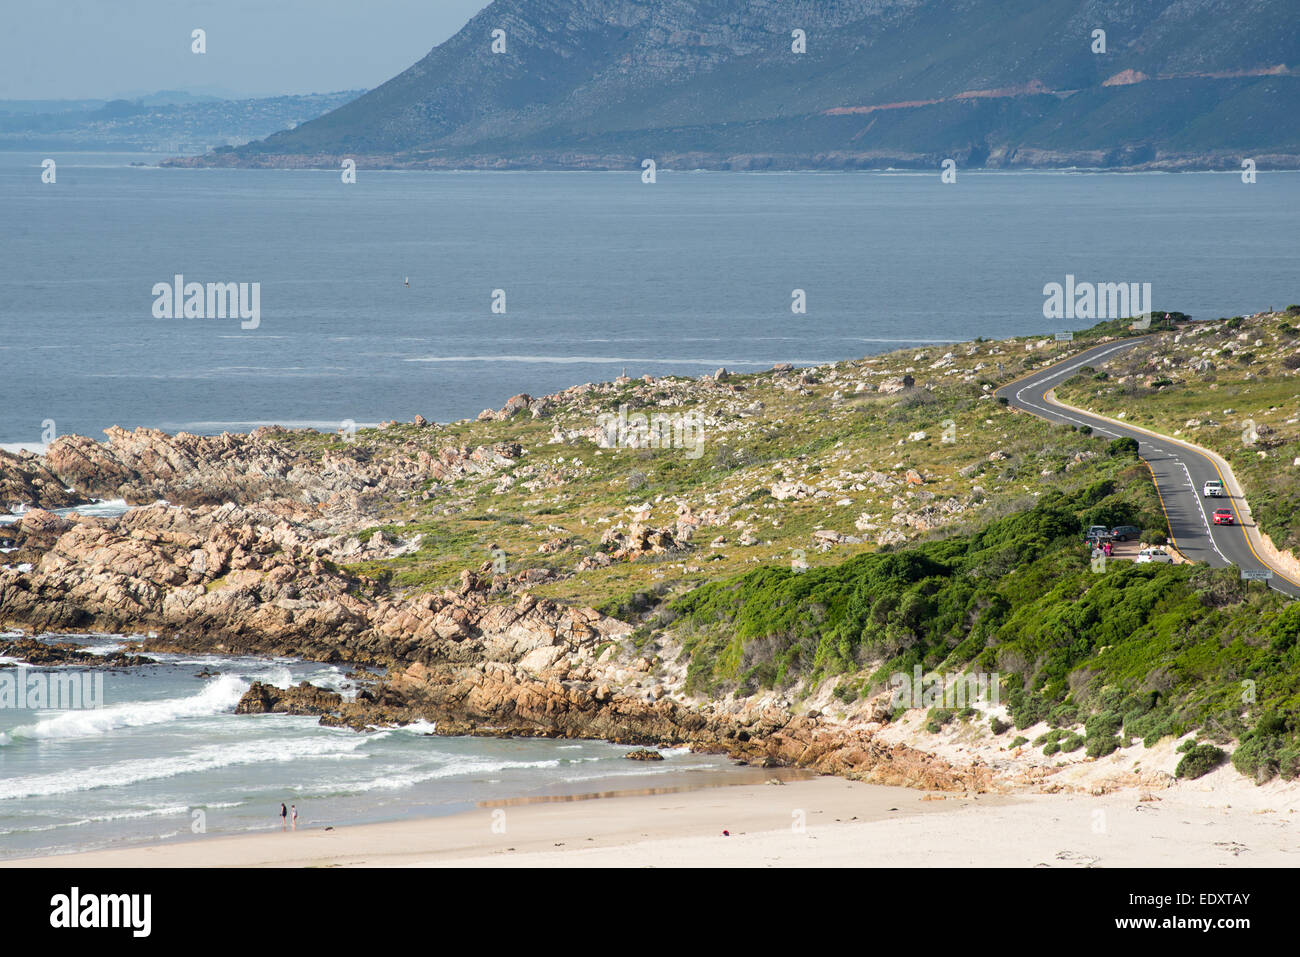 The road to Rooi Els on False Bay, with the Rooi Els Beach in the foreground, and Somerset West in the top left. Stock Photo